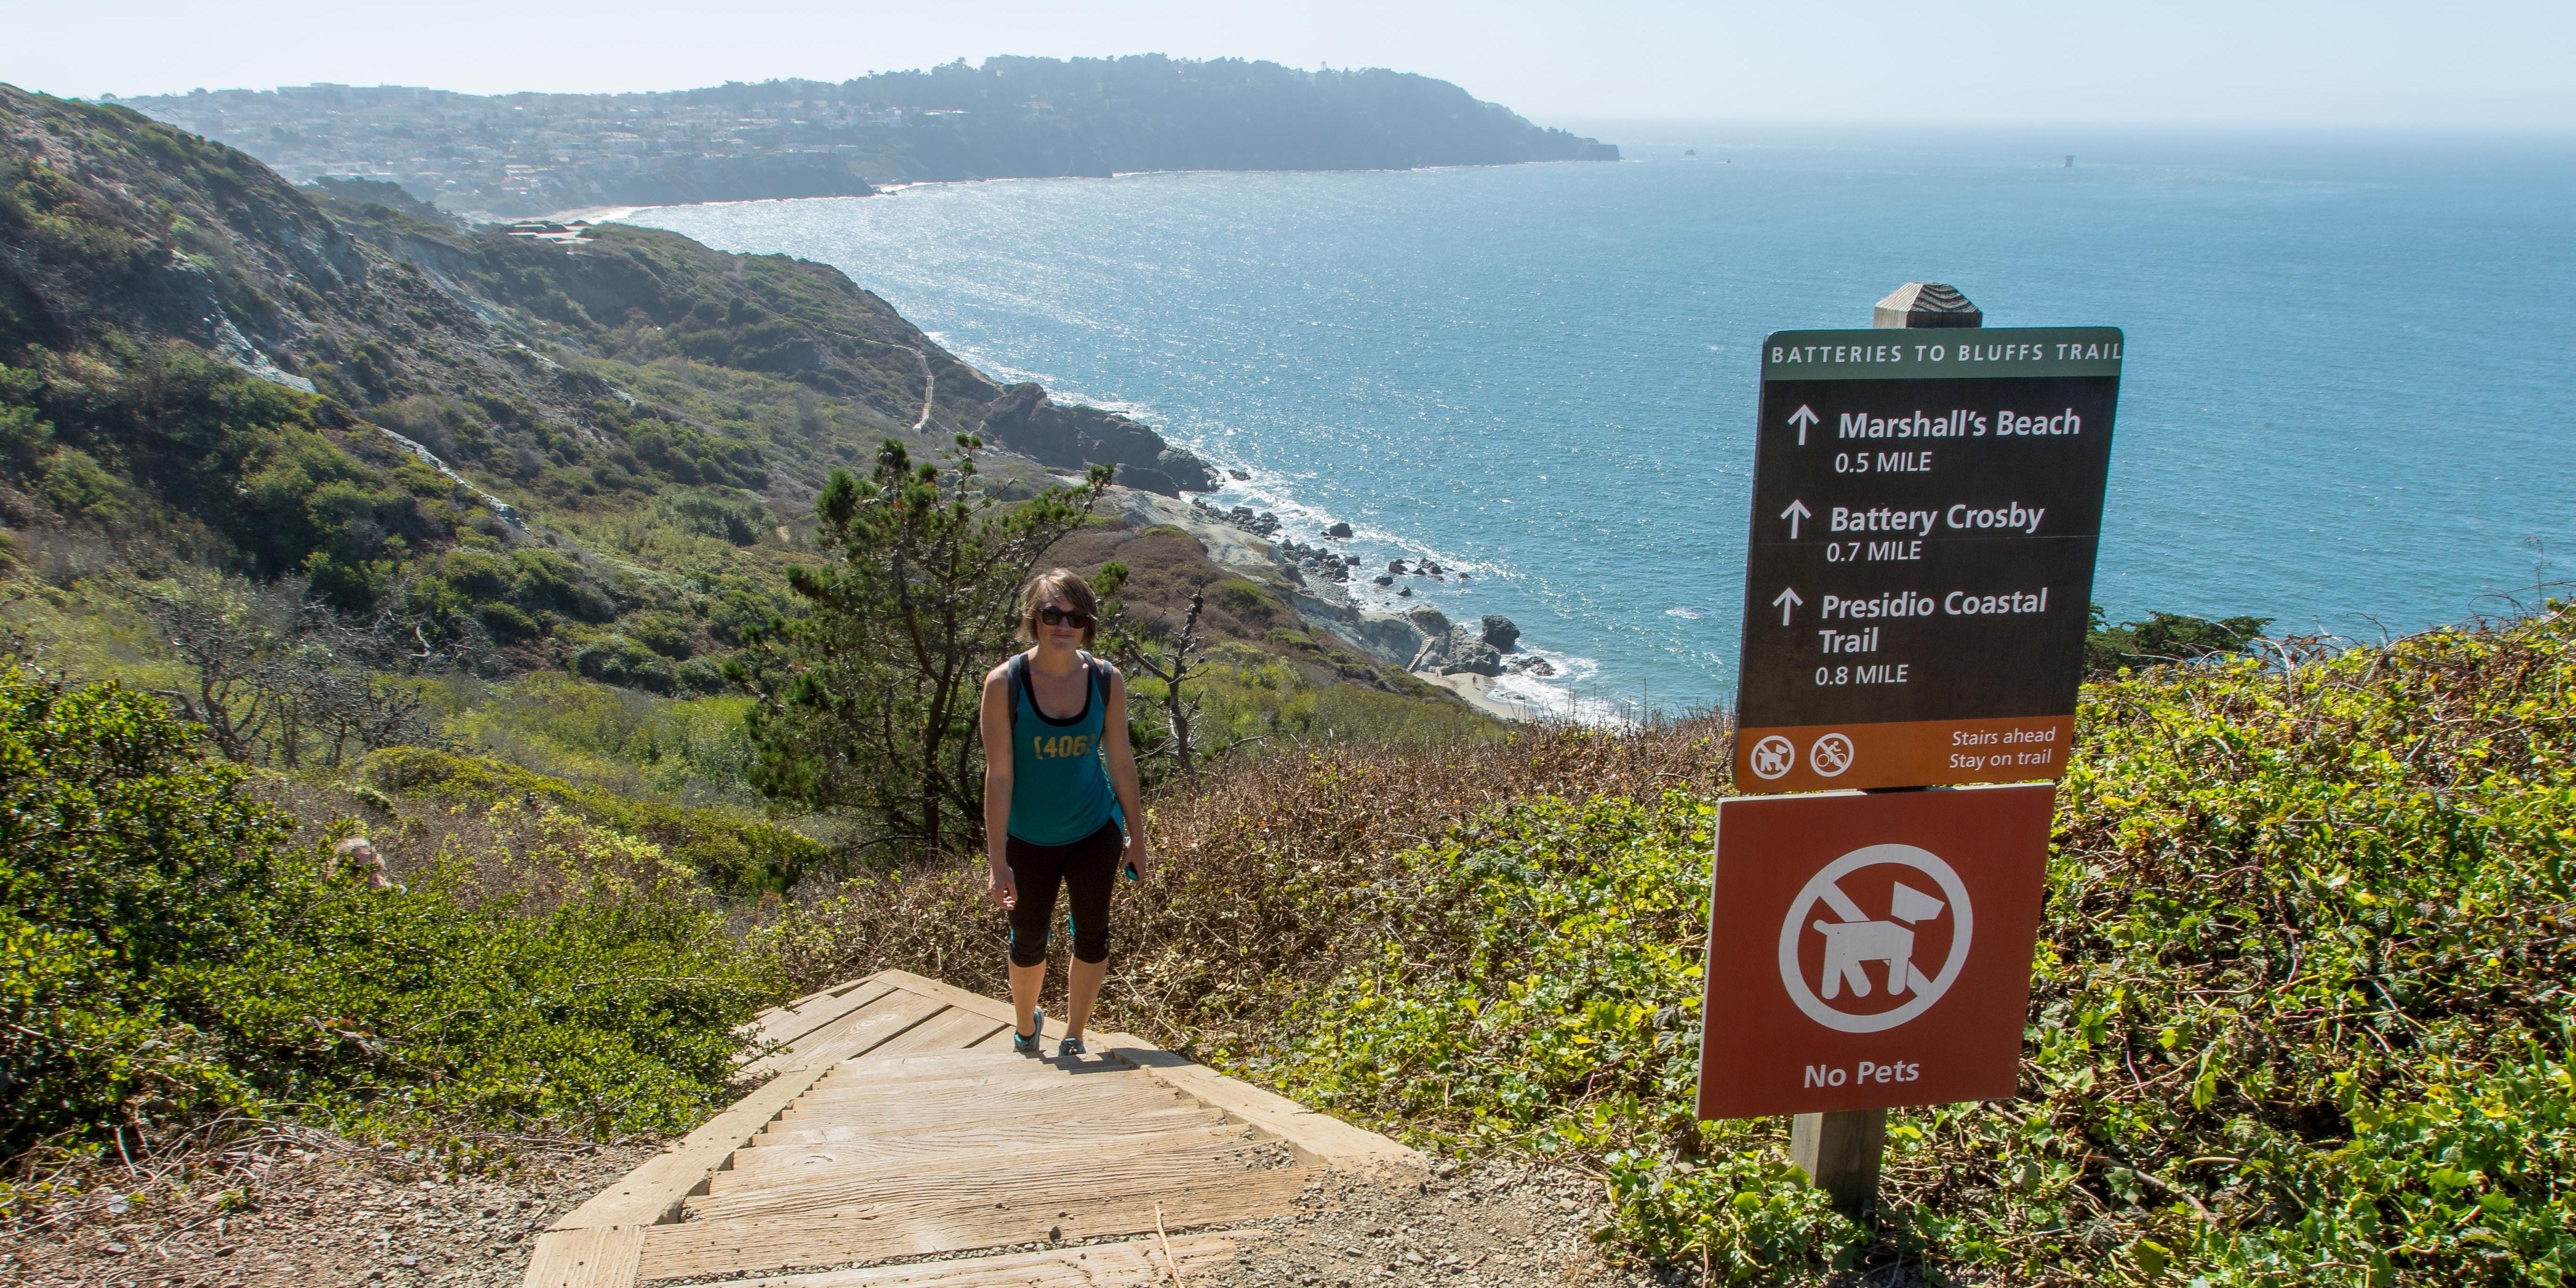 Box steps challenge hikers along the Batteries to Bluffs Trail